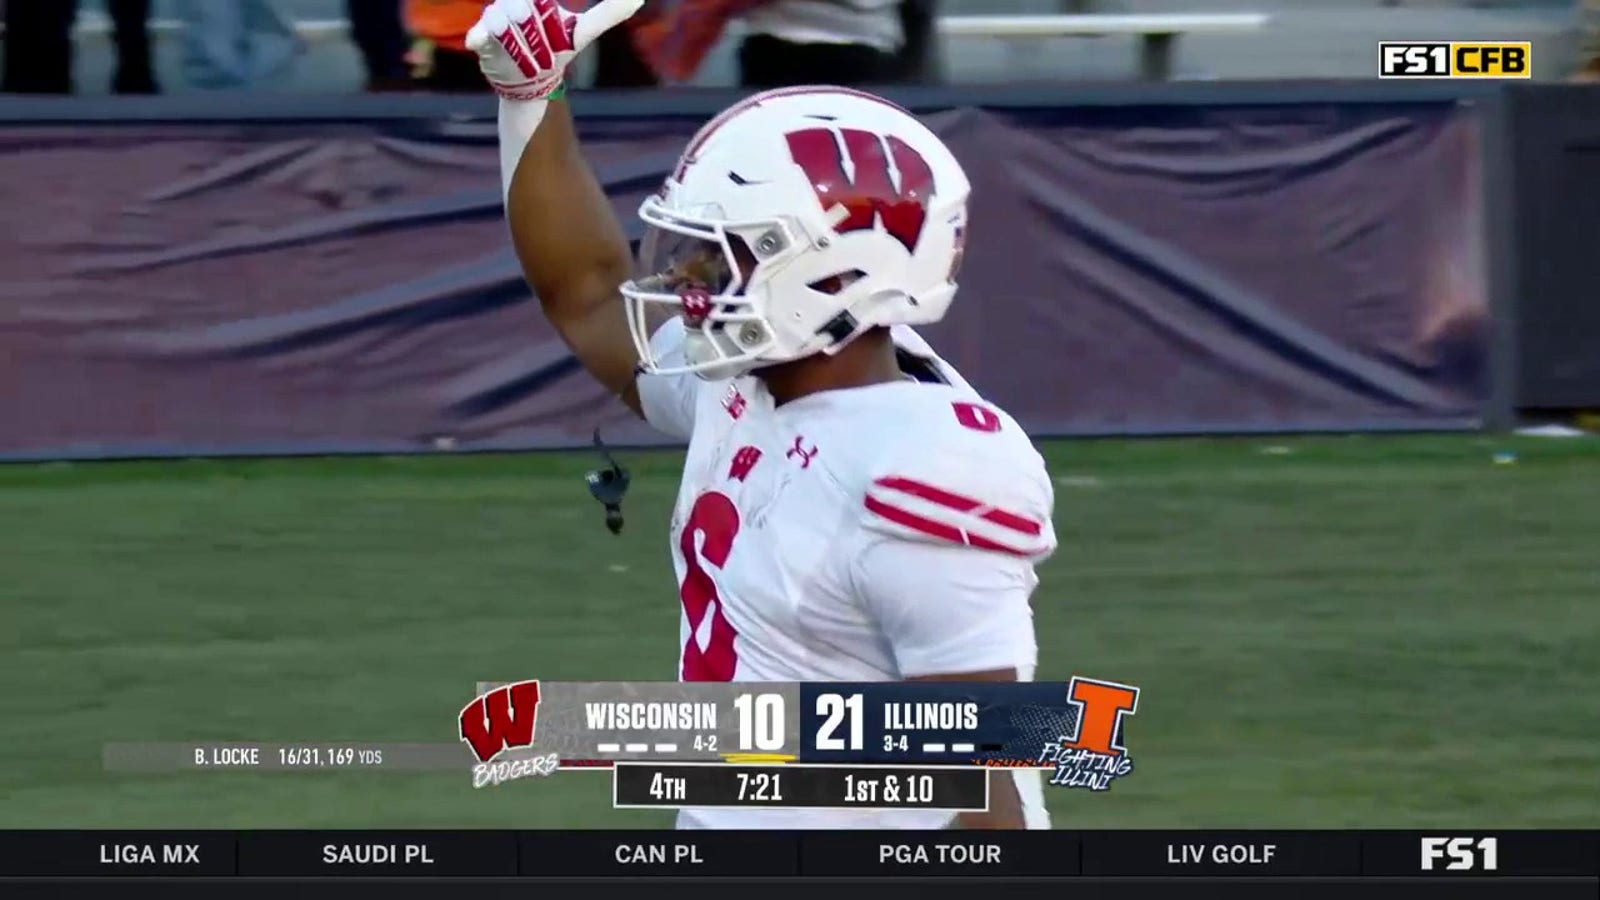 Wisconsin's Braedyn Locke links up with Will Pauling for 20-yard TD